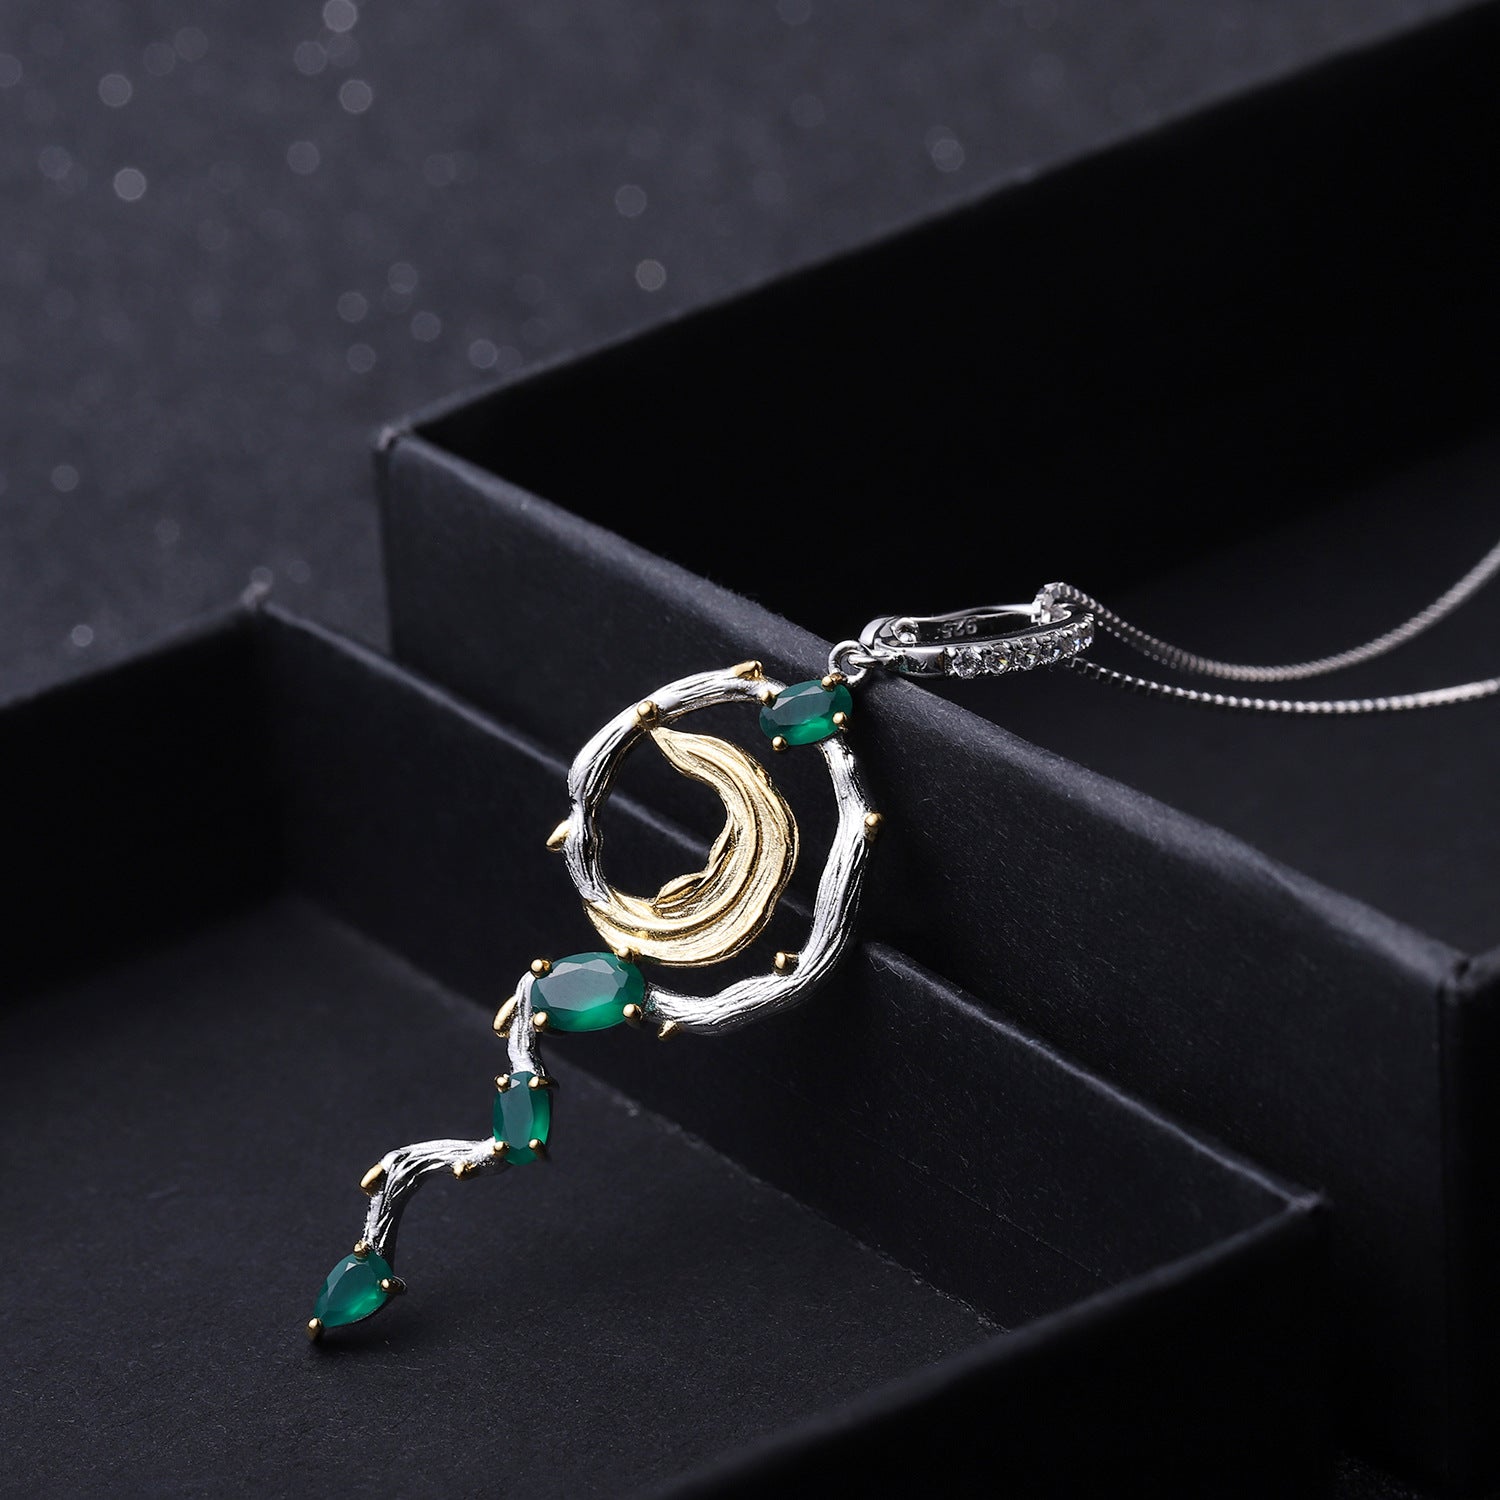 Secret Garden Premium Natural Style Design Inlaid Green Agate Pendant Sterling Silver Necklace for Women